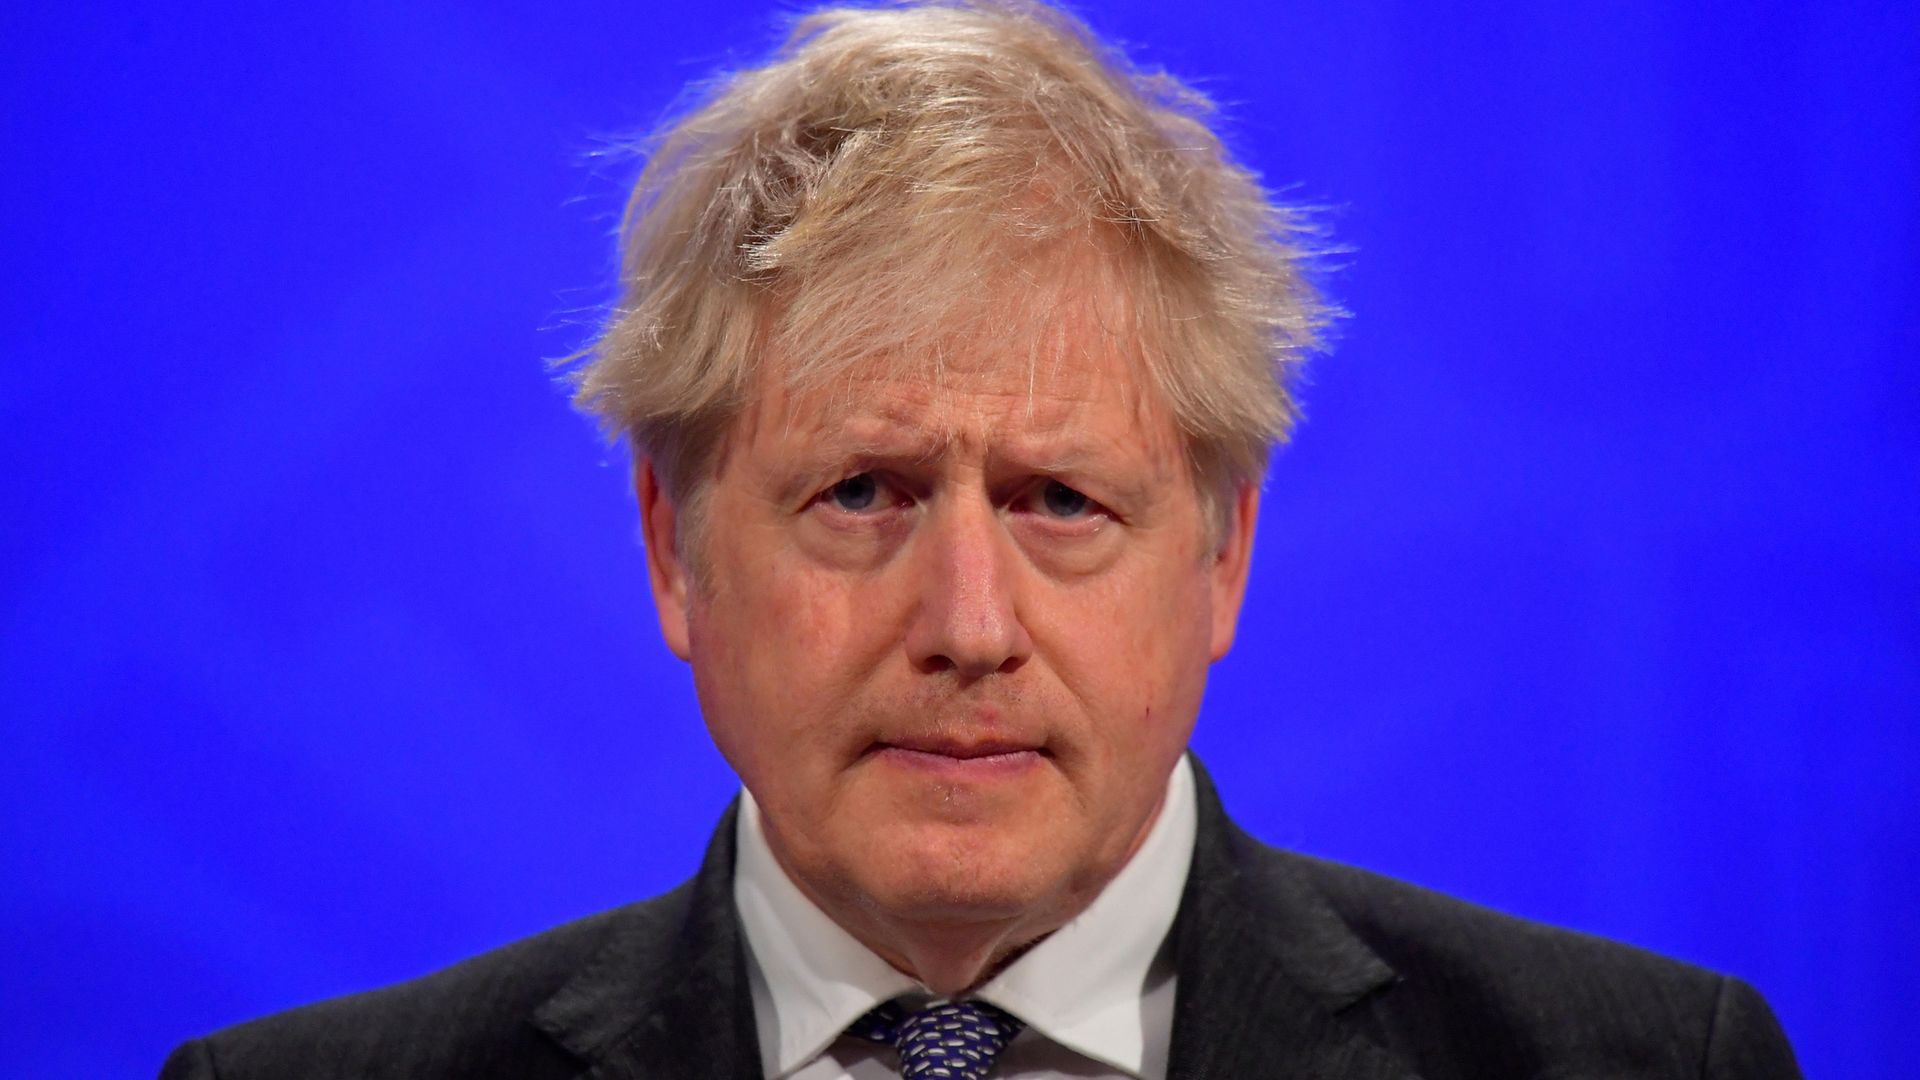 Boris Johnson is under investigation for a holiday he made to the Caribbean in December 2019 - Credit: PA